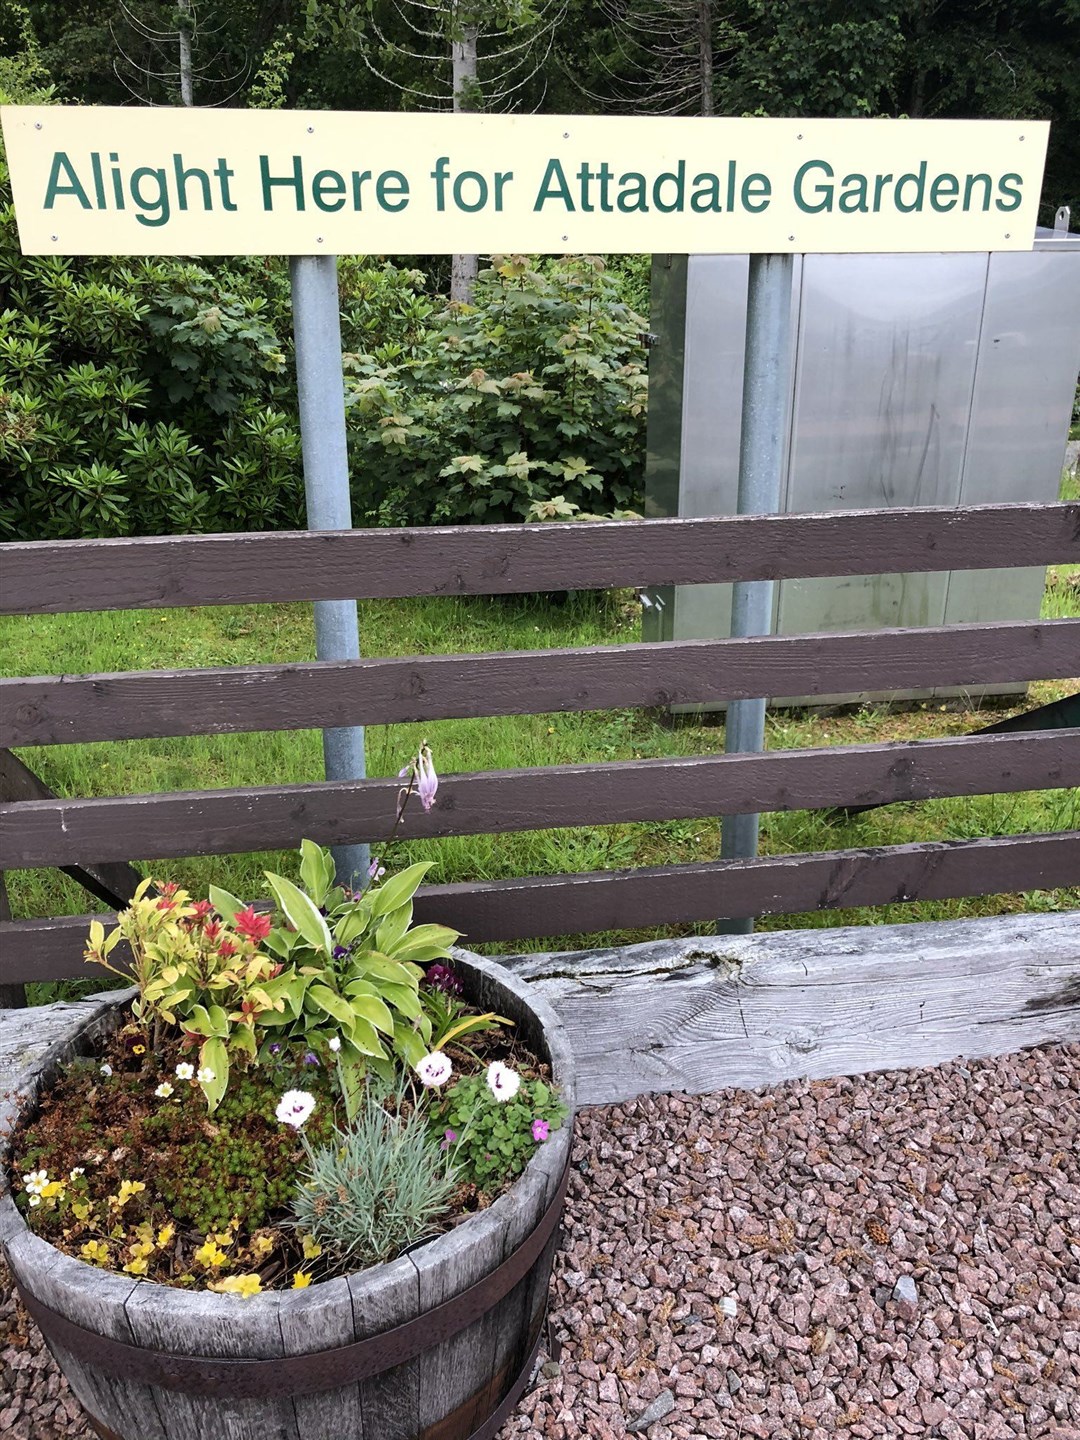 Attadale Station flowers, thriving despite Covid-19 imposed neglect